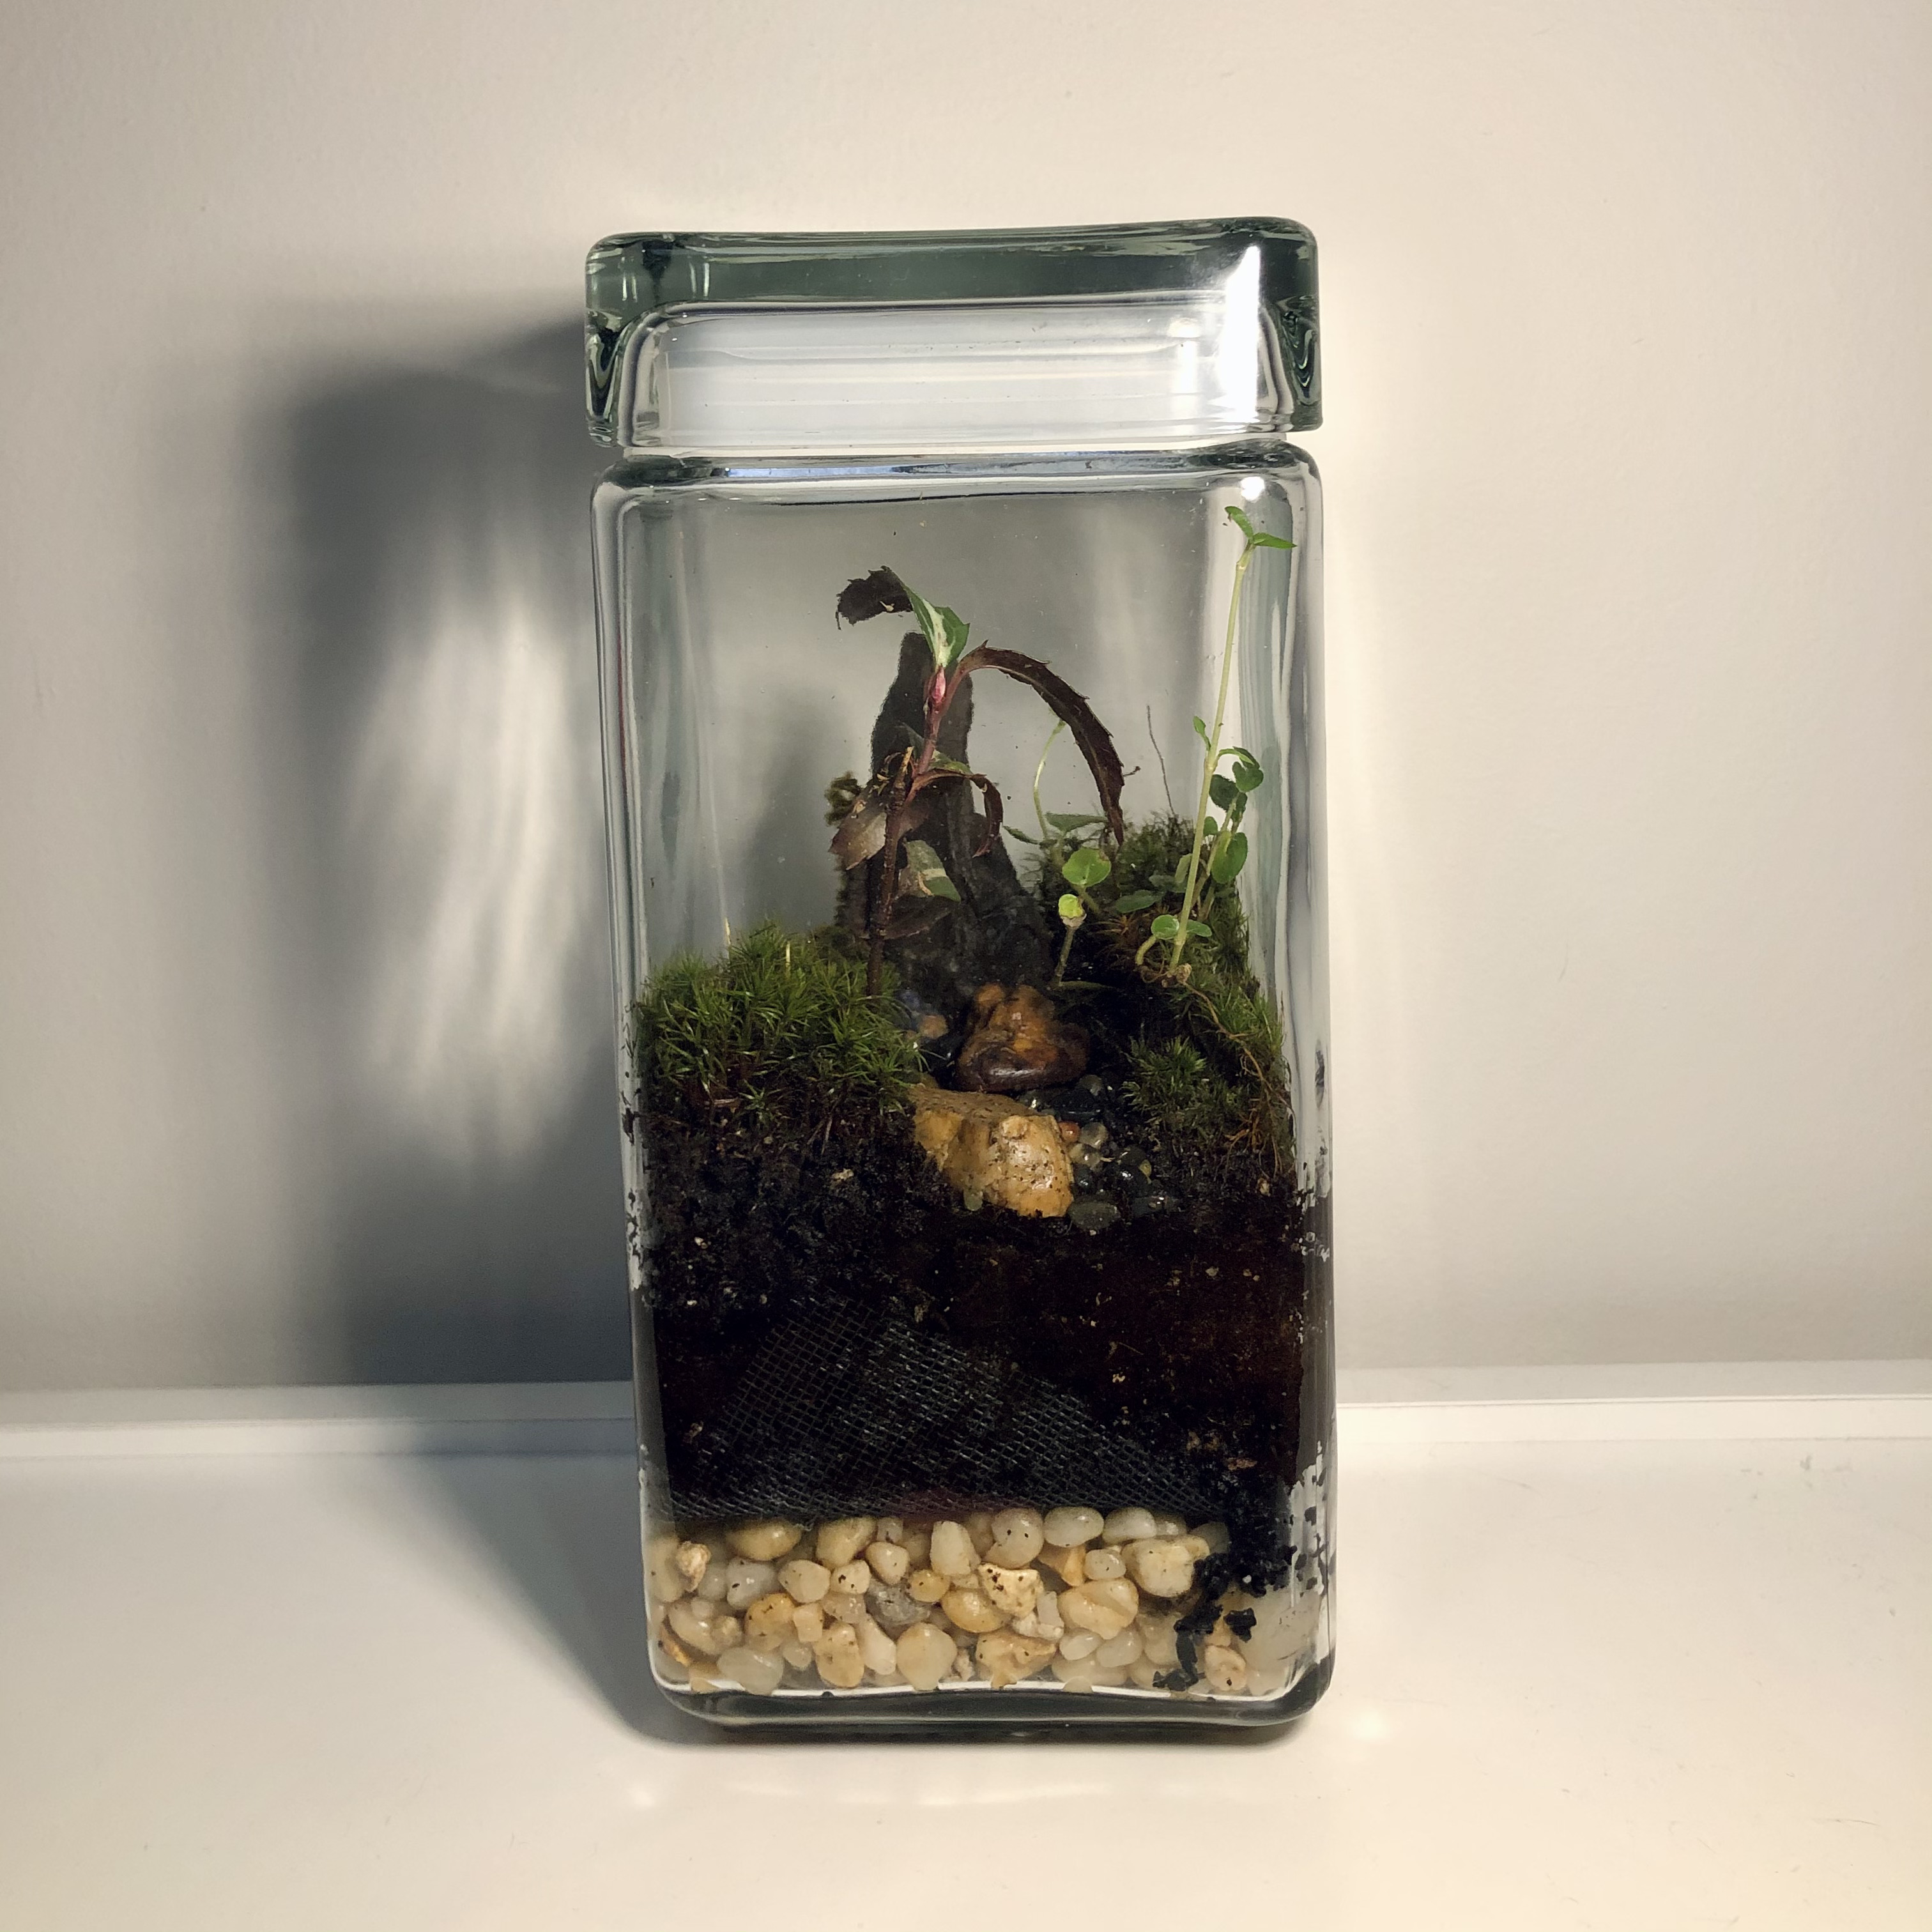 looking at the rectangular terrarium through the left side of the glass, there's layers of gravel and soil at the bottom, and on top there's moss on both sides, a yellow rock in the center and a small plant and pointy rock behind it.